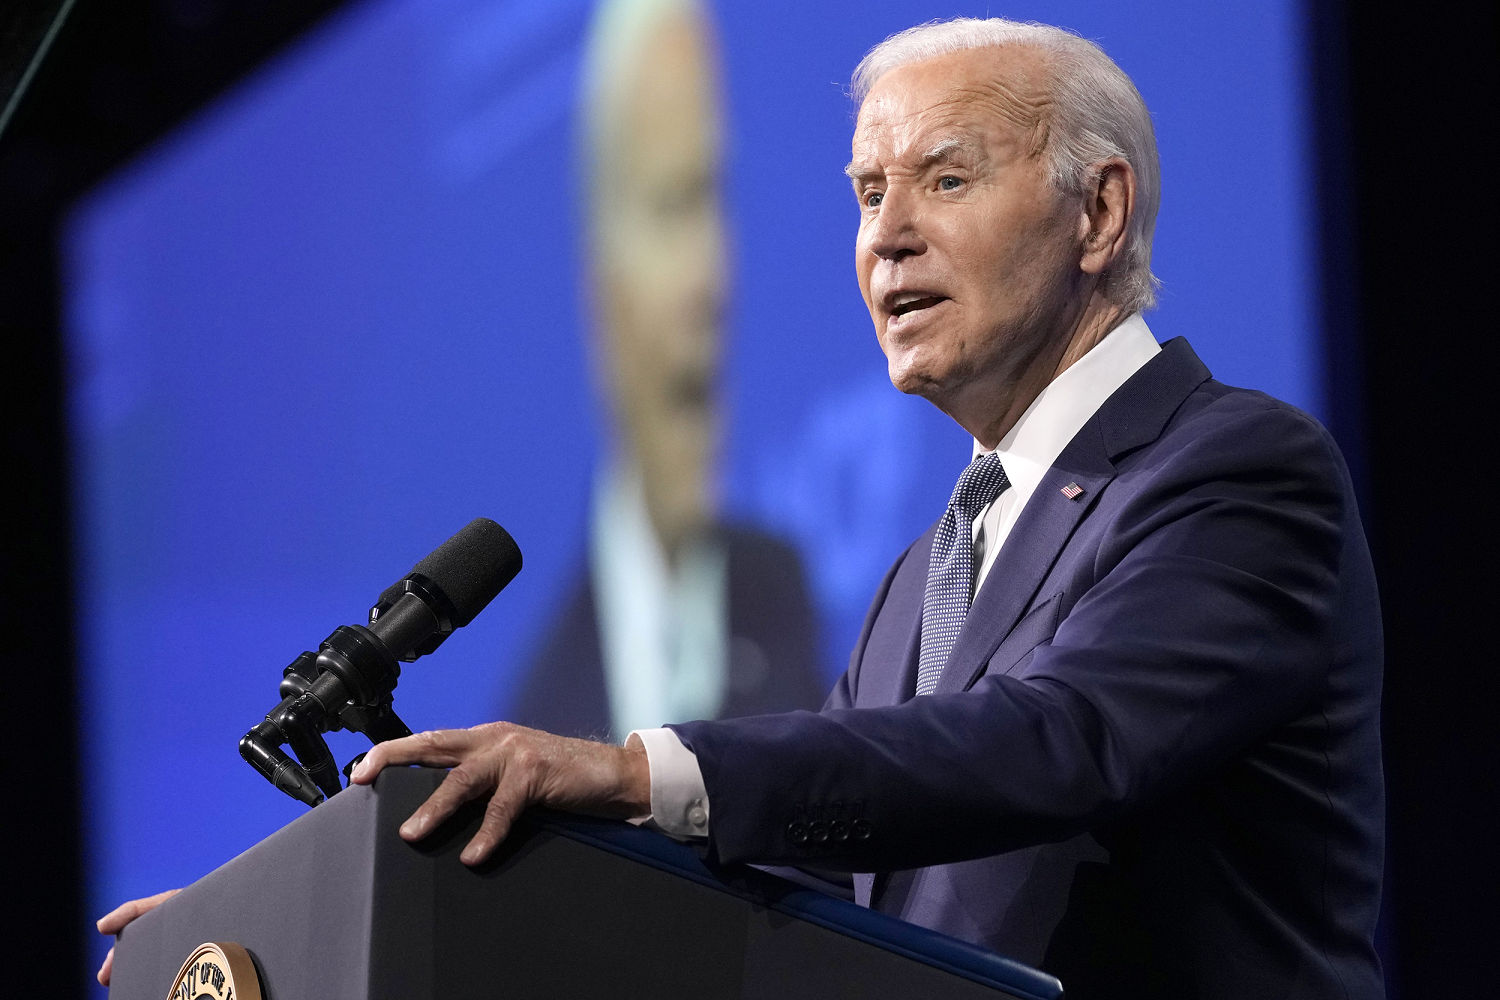 Biden, looking to bolster Latino support, is forced to cancel speech after Covid diagnosis